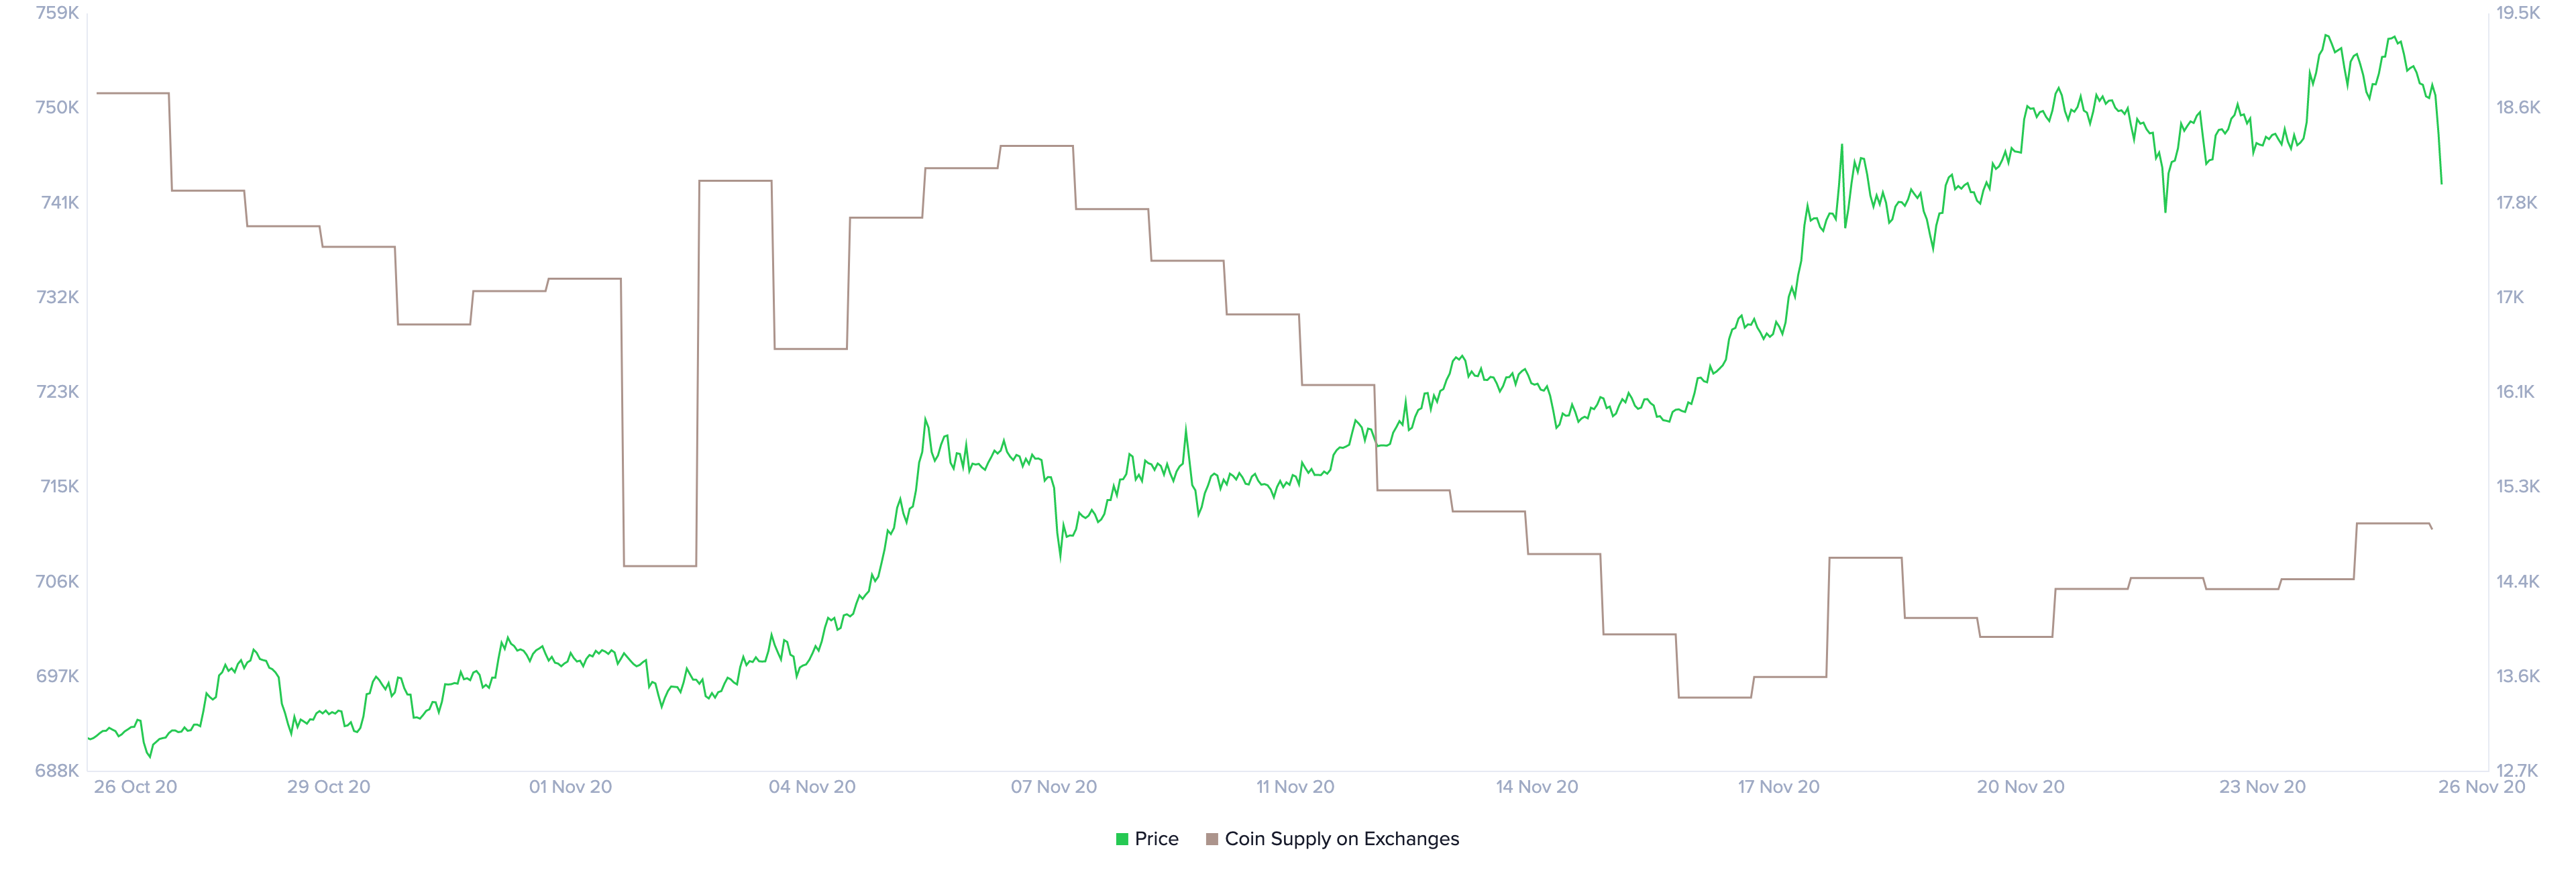 Bitcoin's supply on exchanges